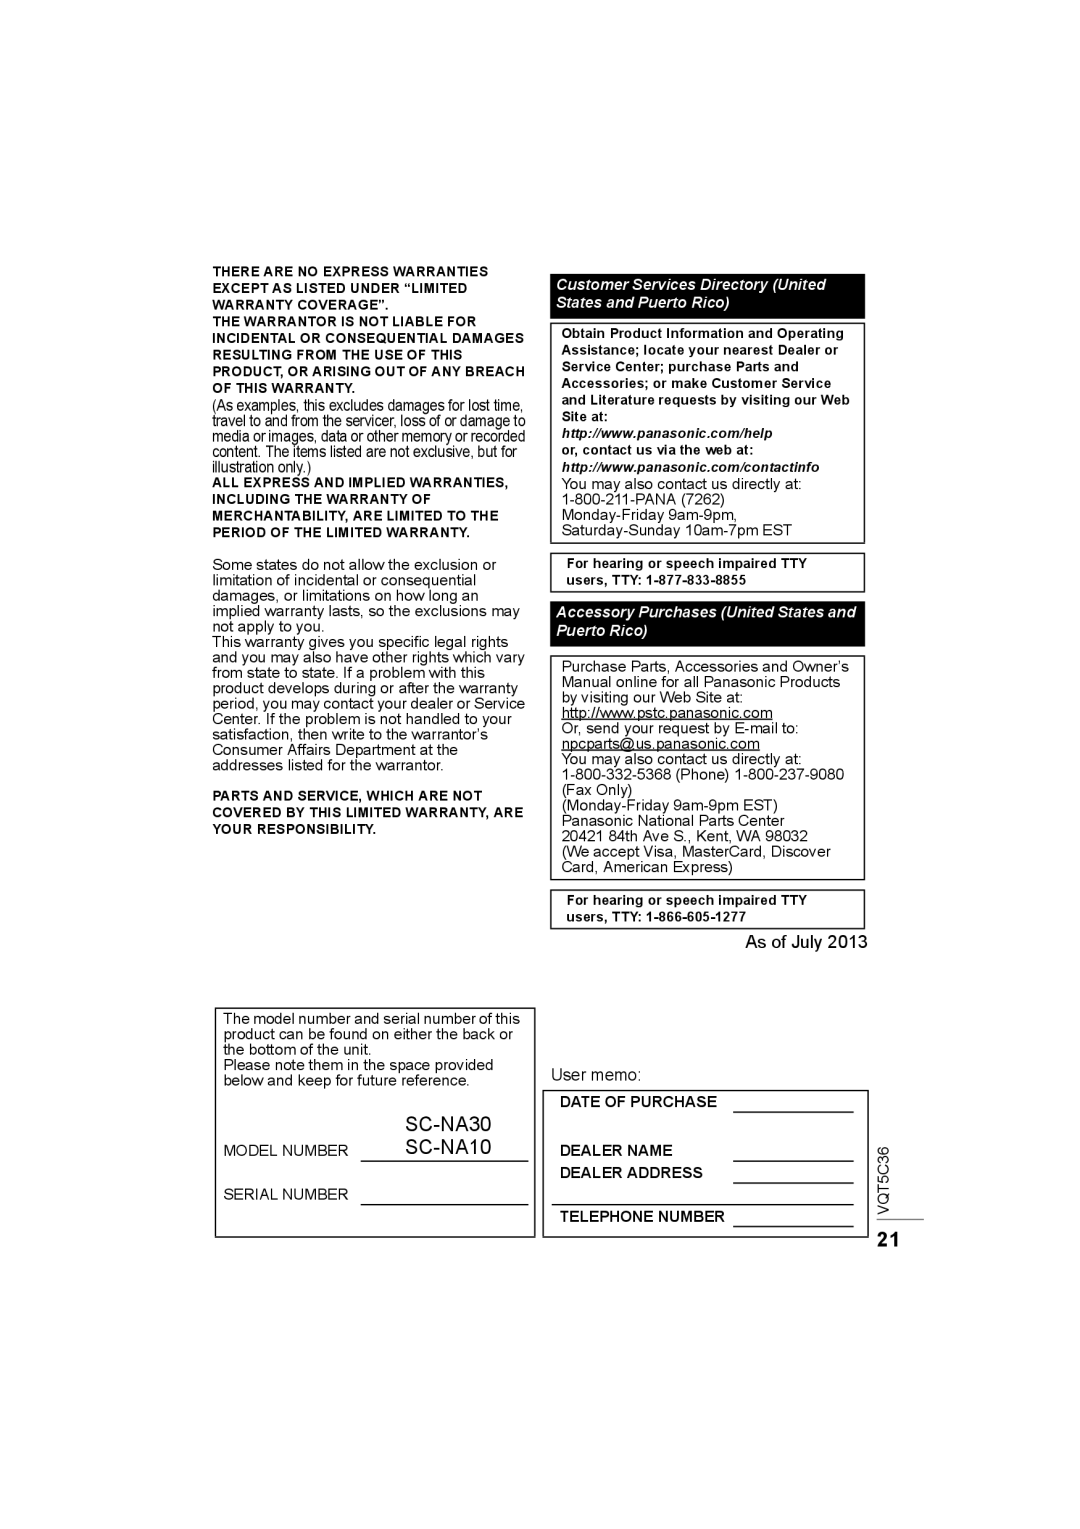 Panasonic SC-NA30 owner manual SC-NA10, As of July User memo, Customer Services Directory United, States and Puerto Rico 